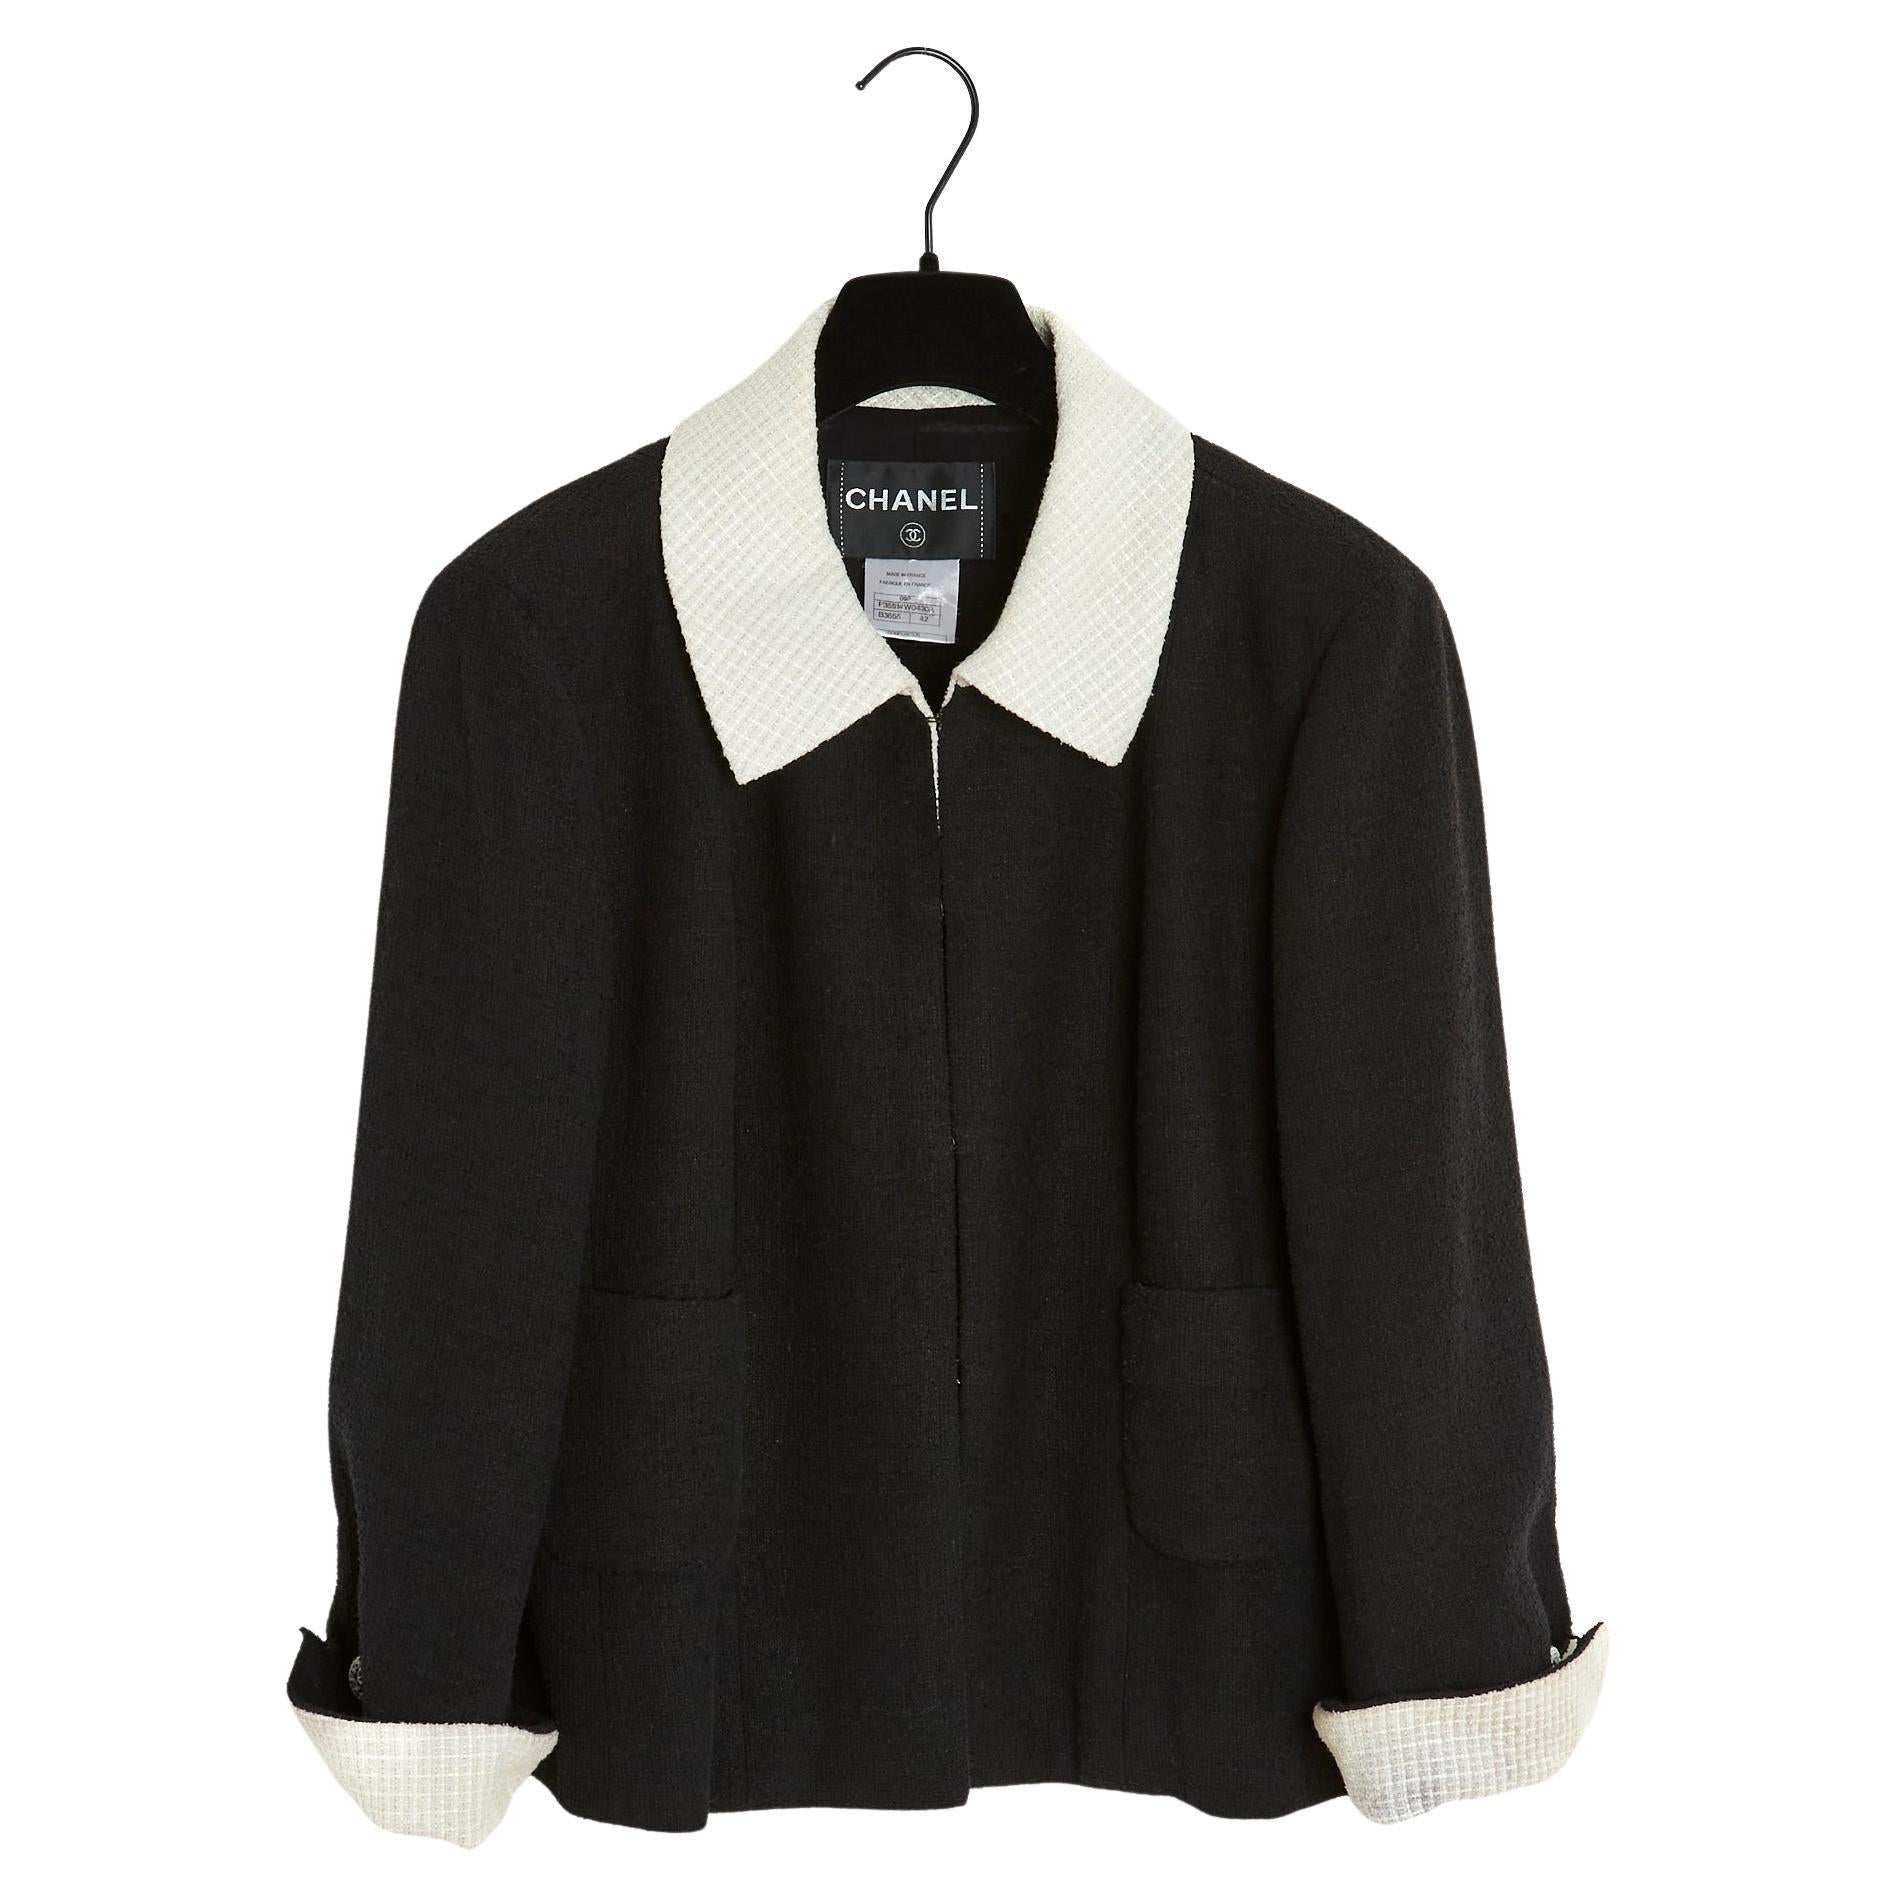 Chanel Terry Cloth Jacket - 5 For Sale on 1stDibs